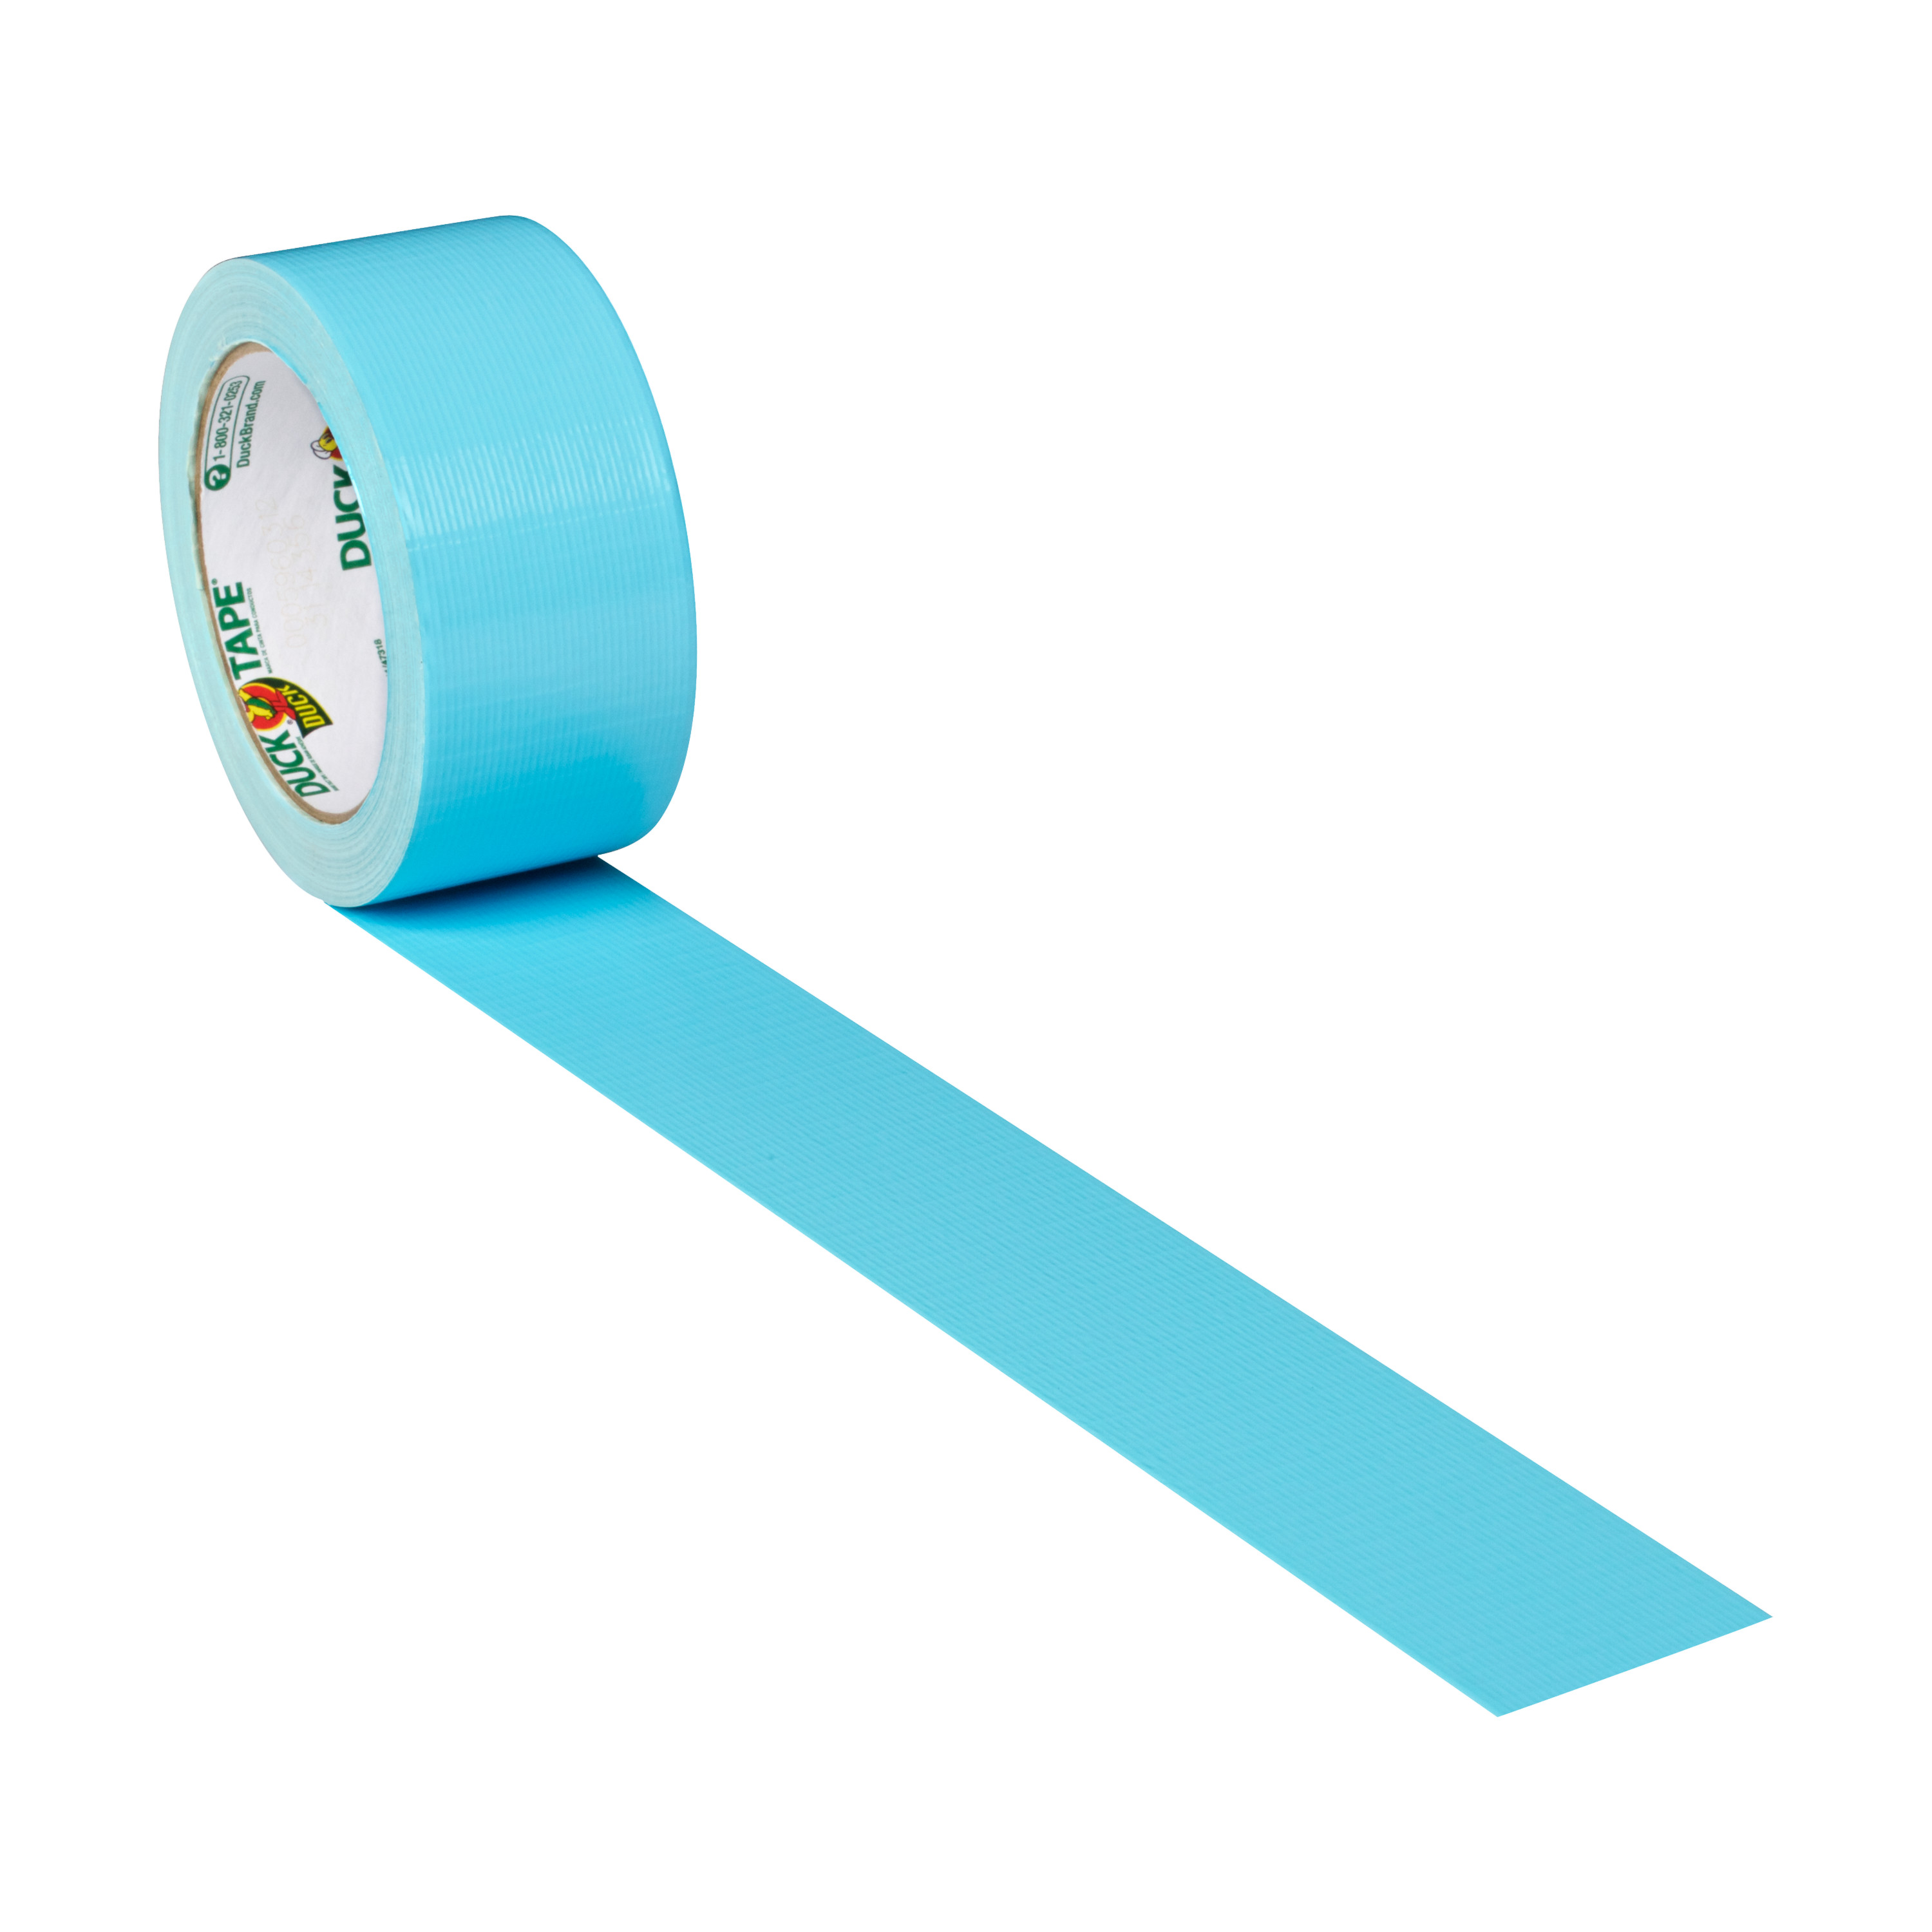 Duck Brand 1.88 in. x 20 yd. Frozen Blue Colored Duct Tape, 3 Pack - image 5 of 7